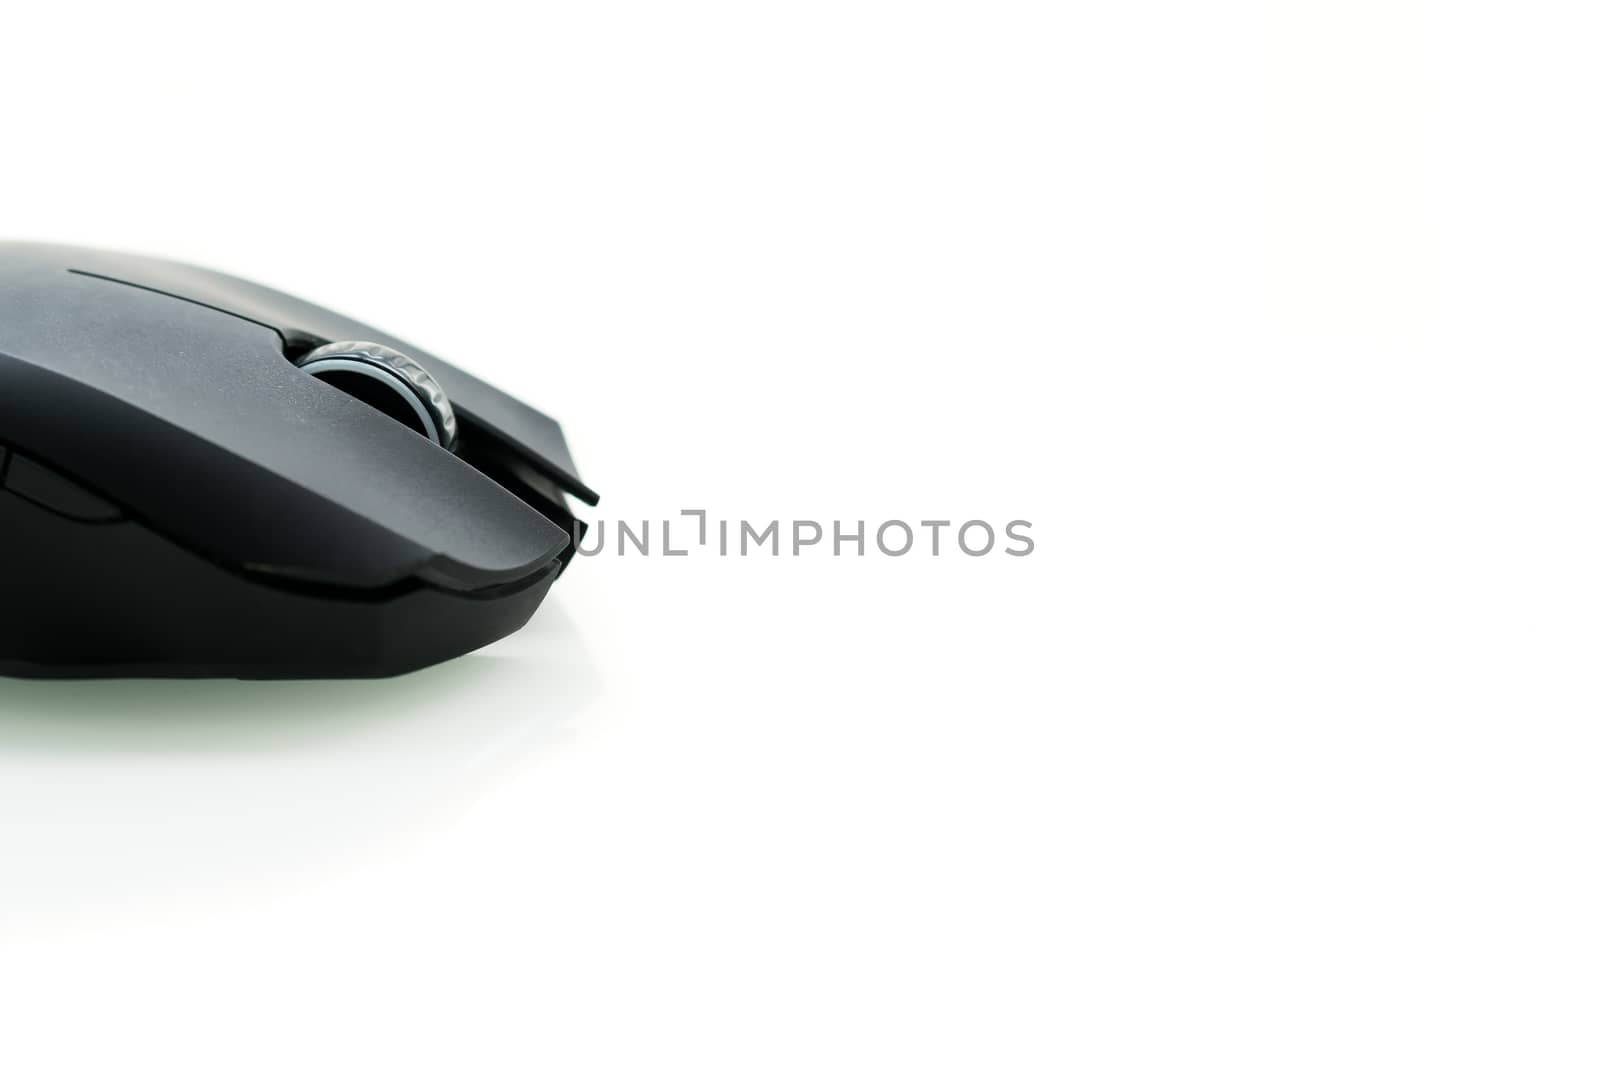 Wireless black computer mouse isolated on white background, closeup sideview